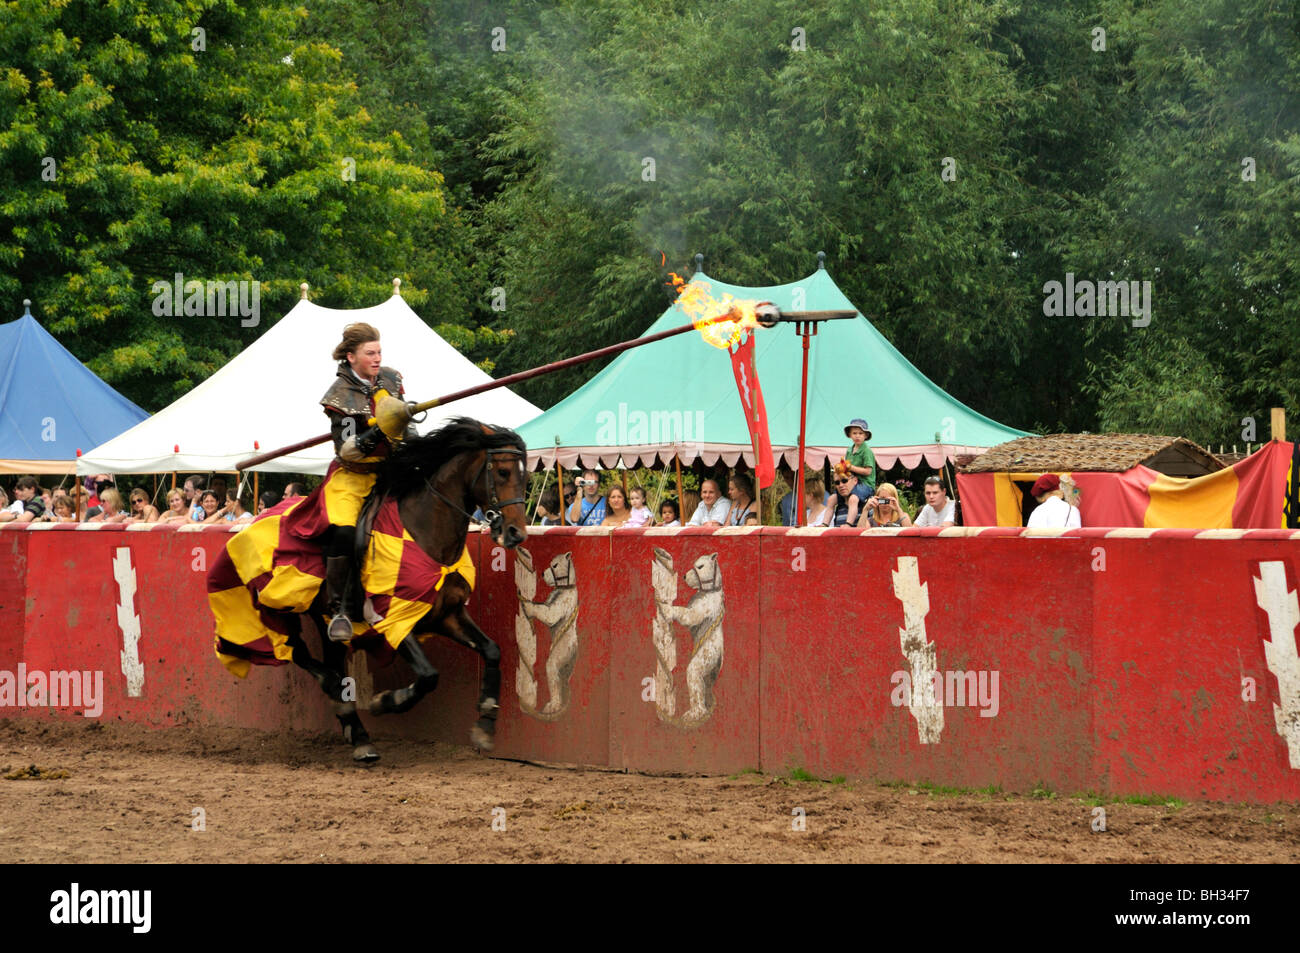 Knight demonstrating their riding skills at Warwick castle, UK. Stock Photo